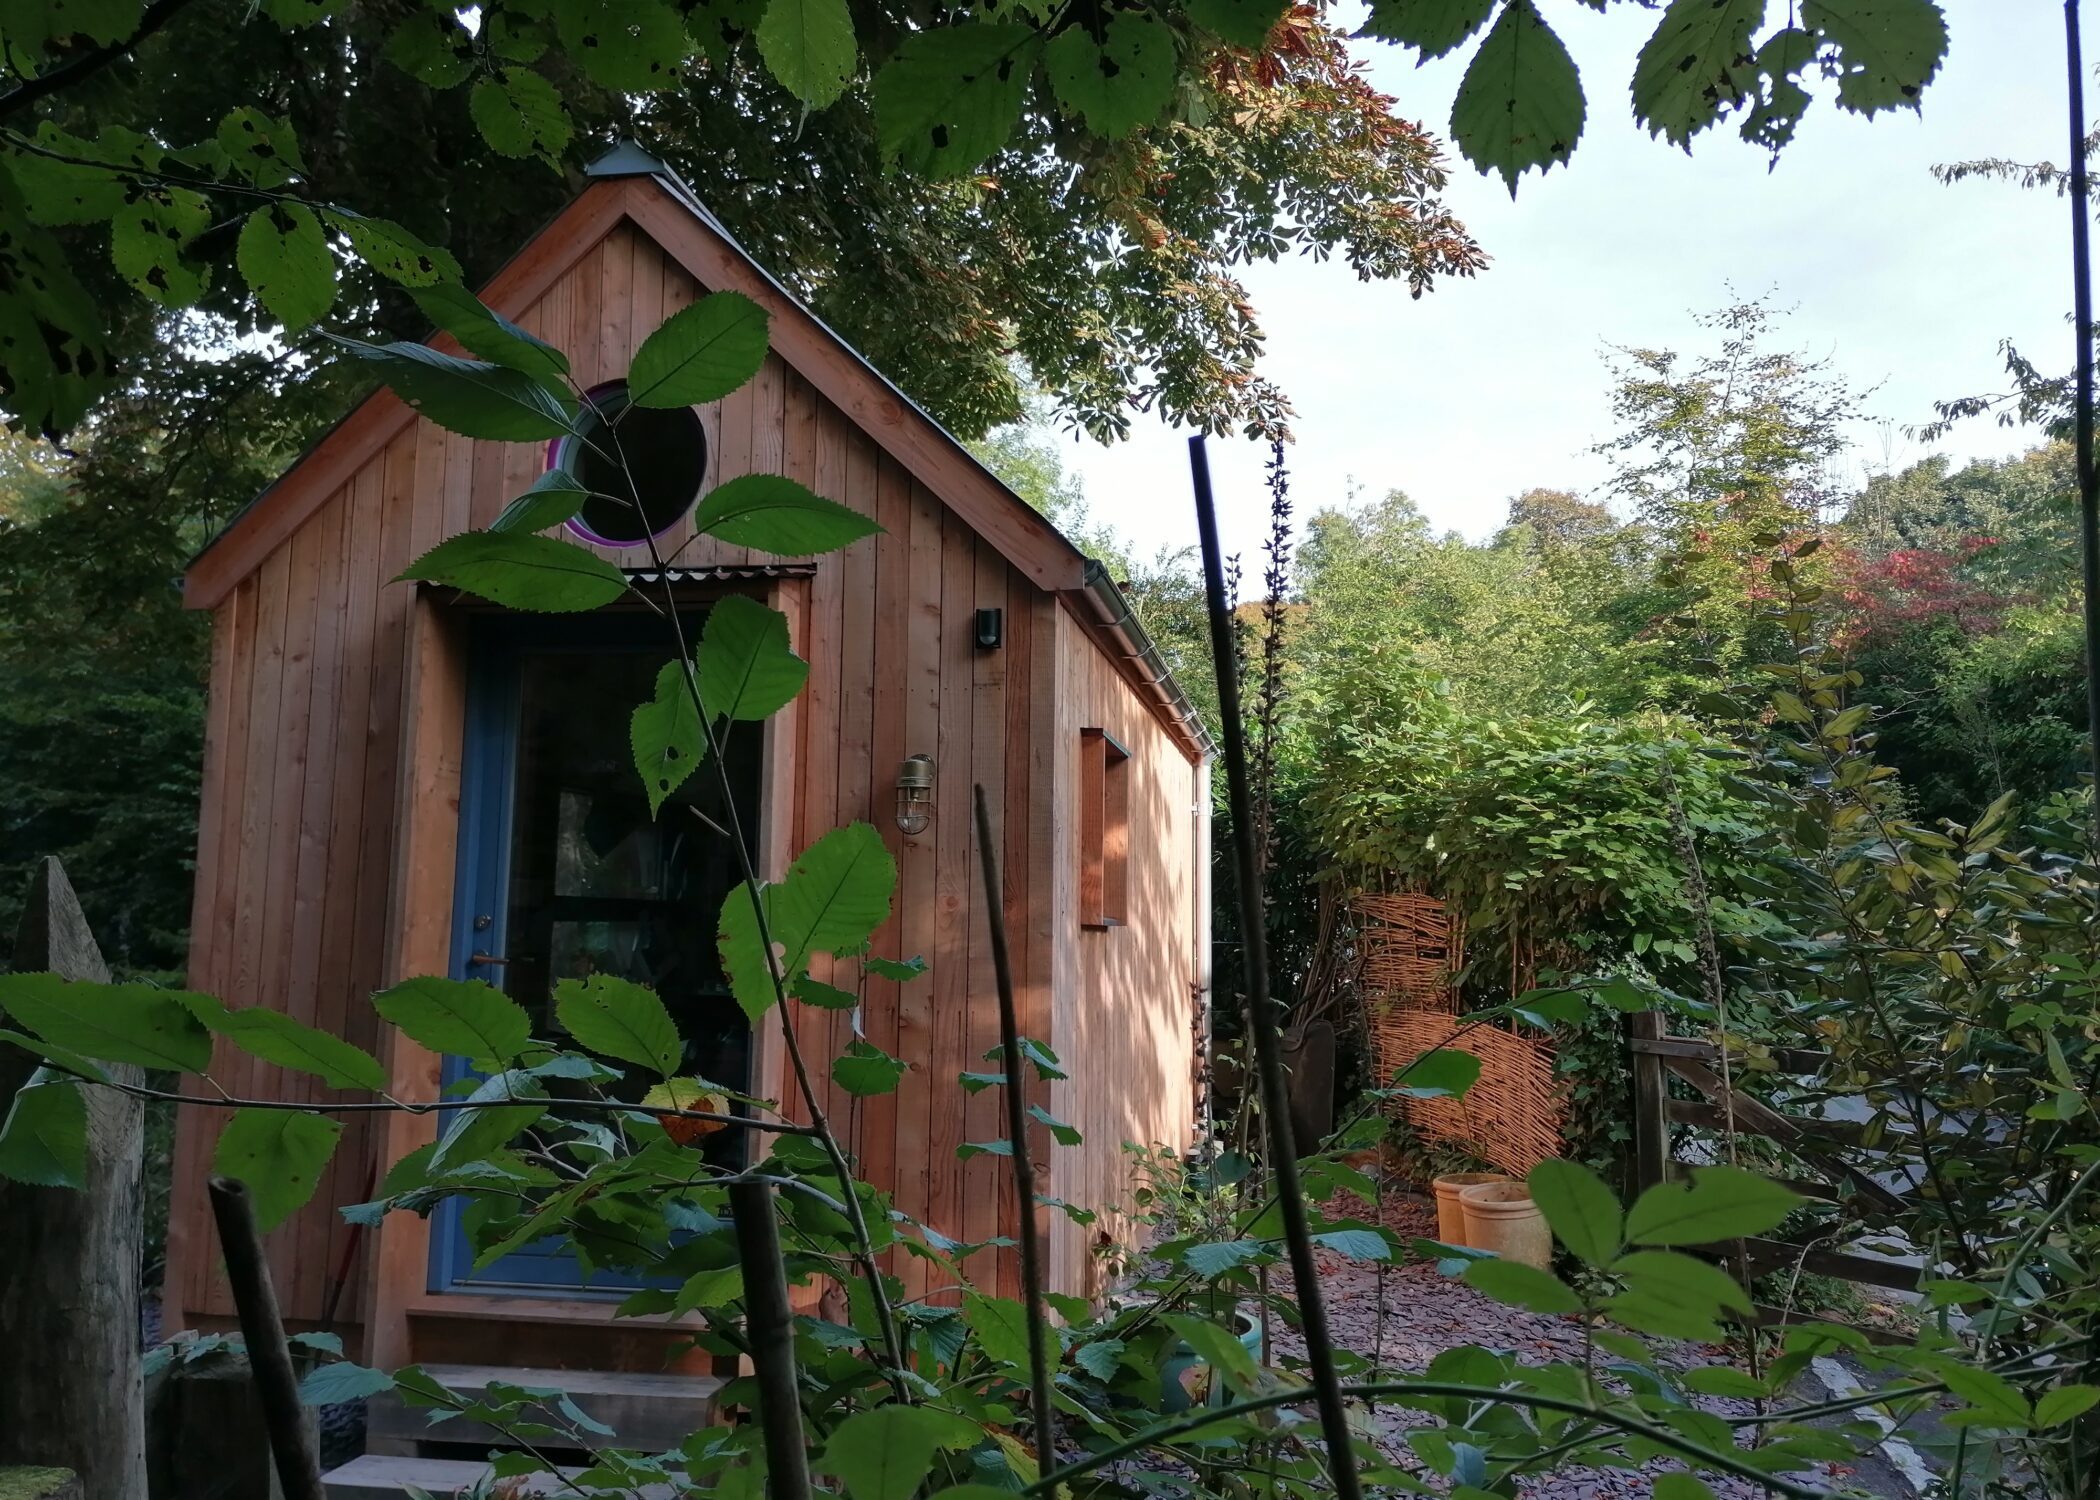 Artist Studio Cabin in Devon designed and built by Life Space Cabins